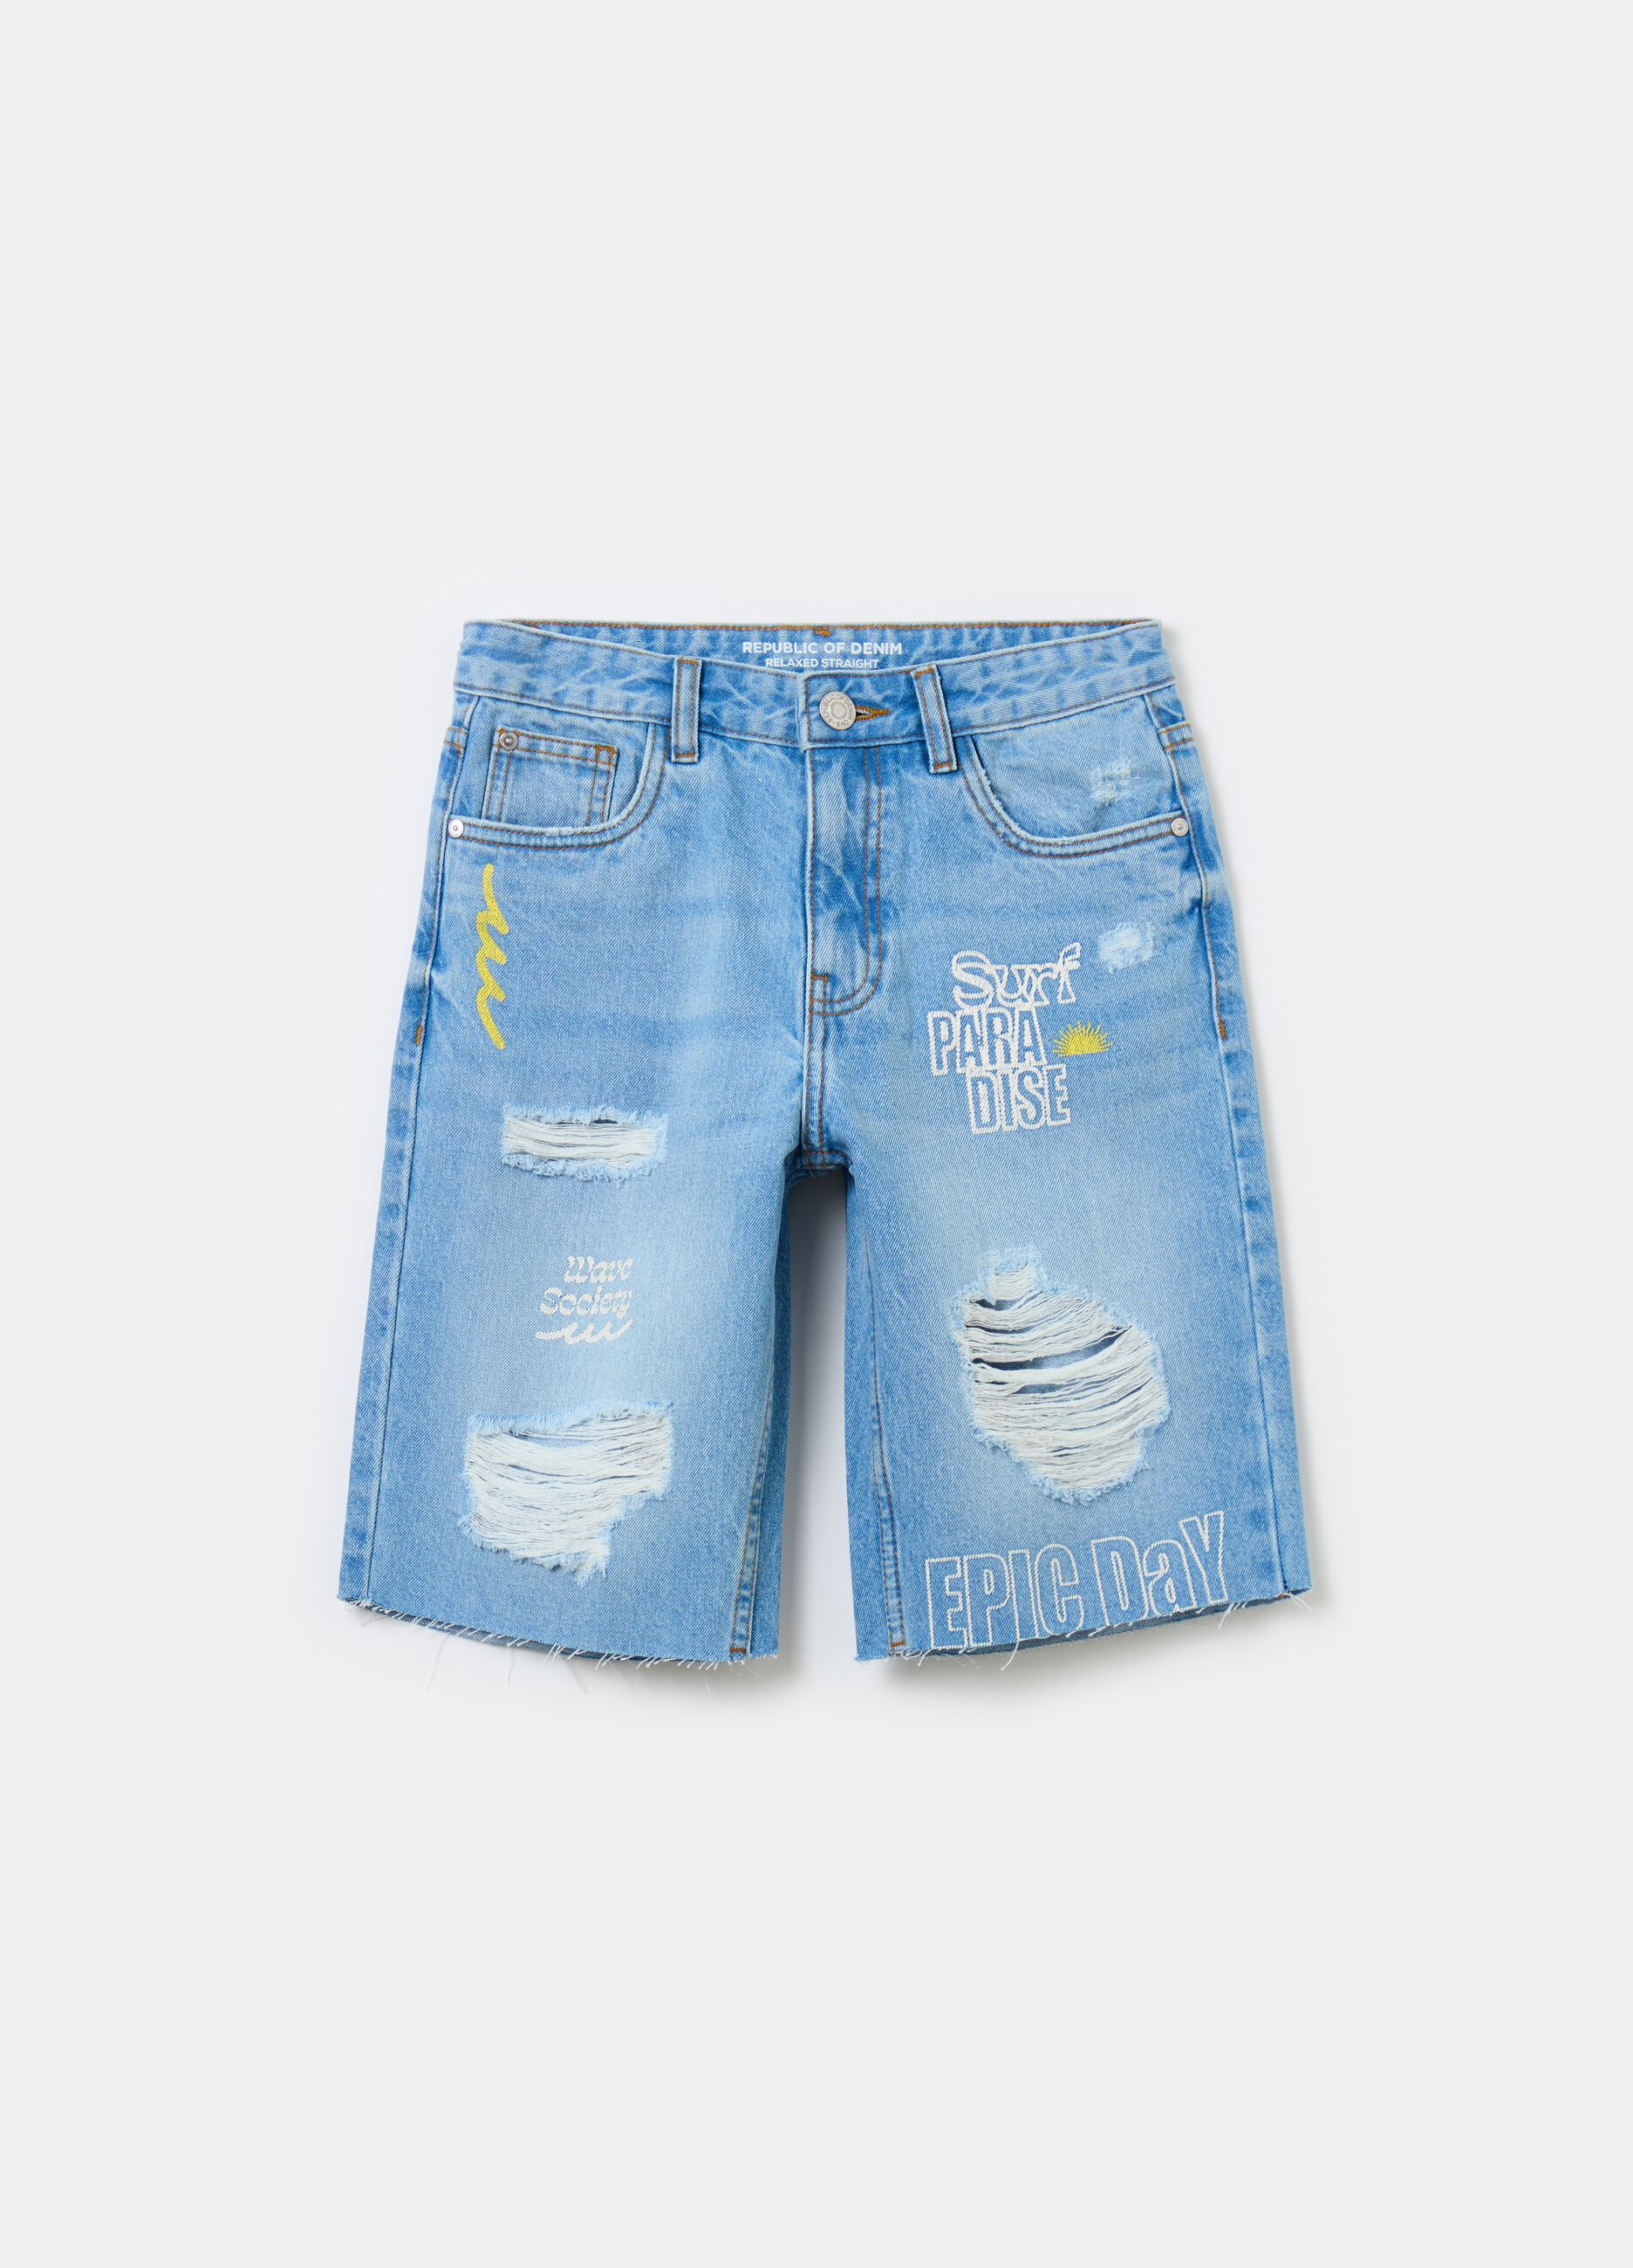 Denim Bermuda shorts with abrasions and print